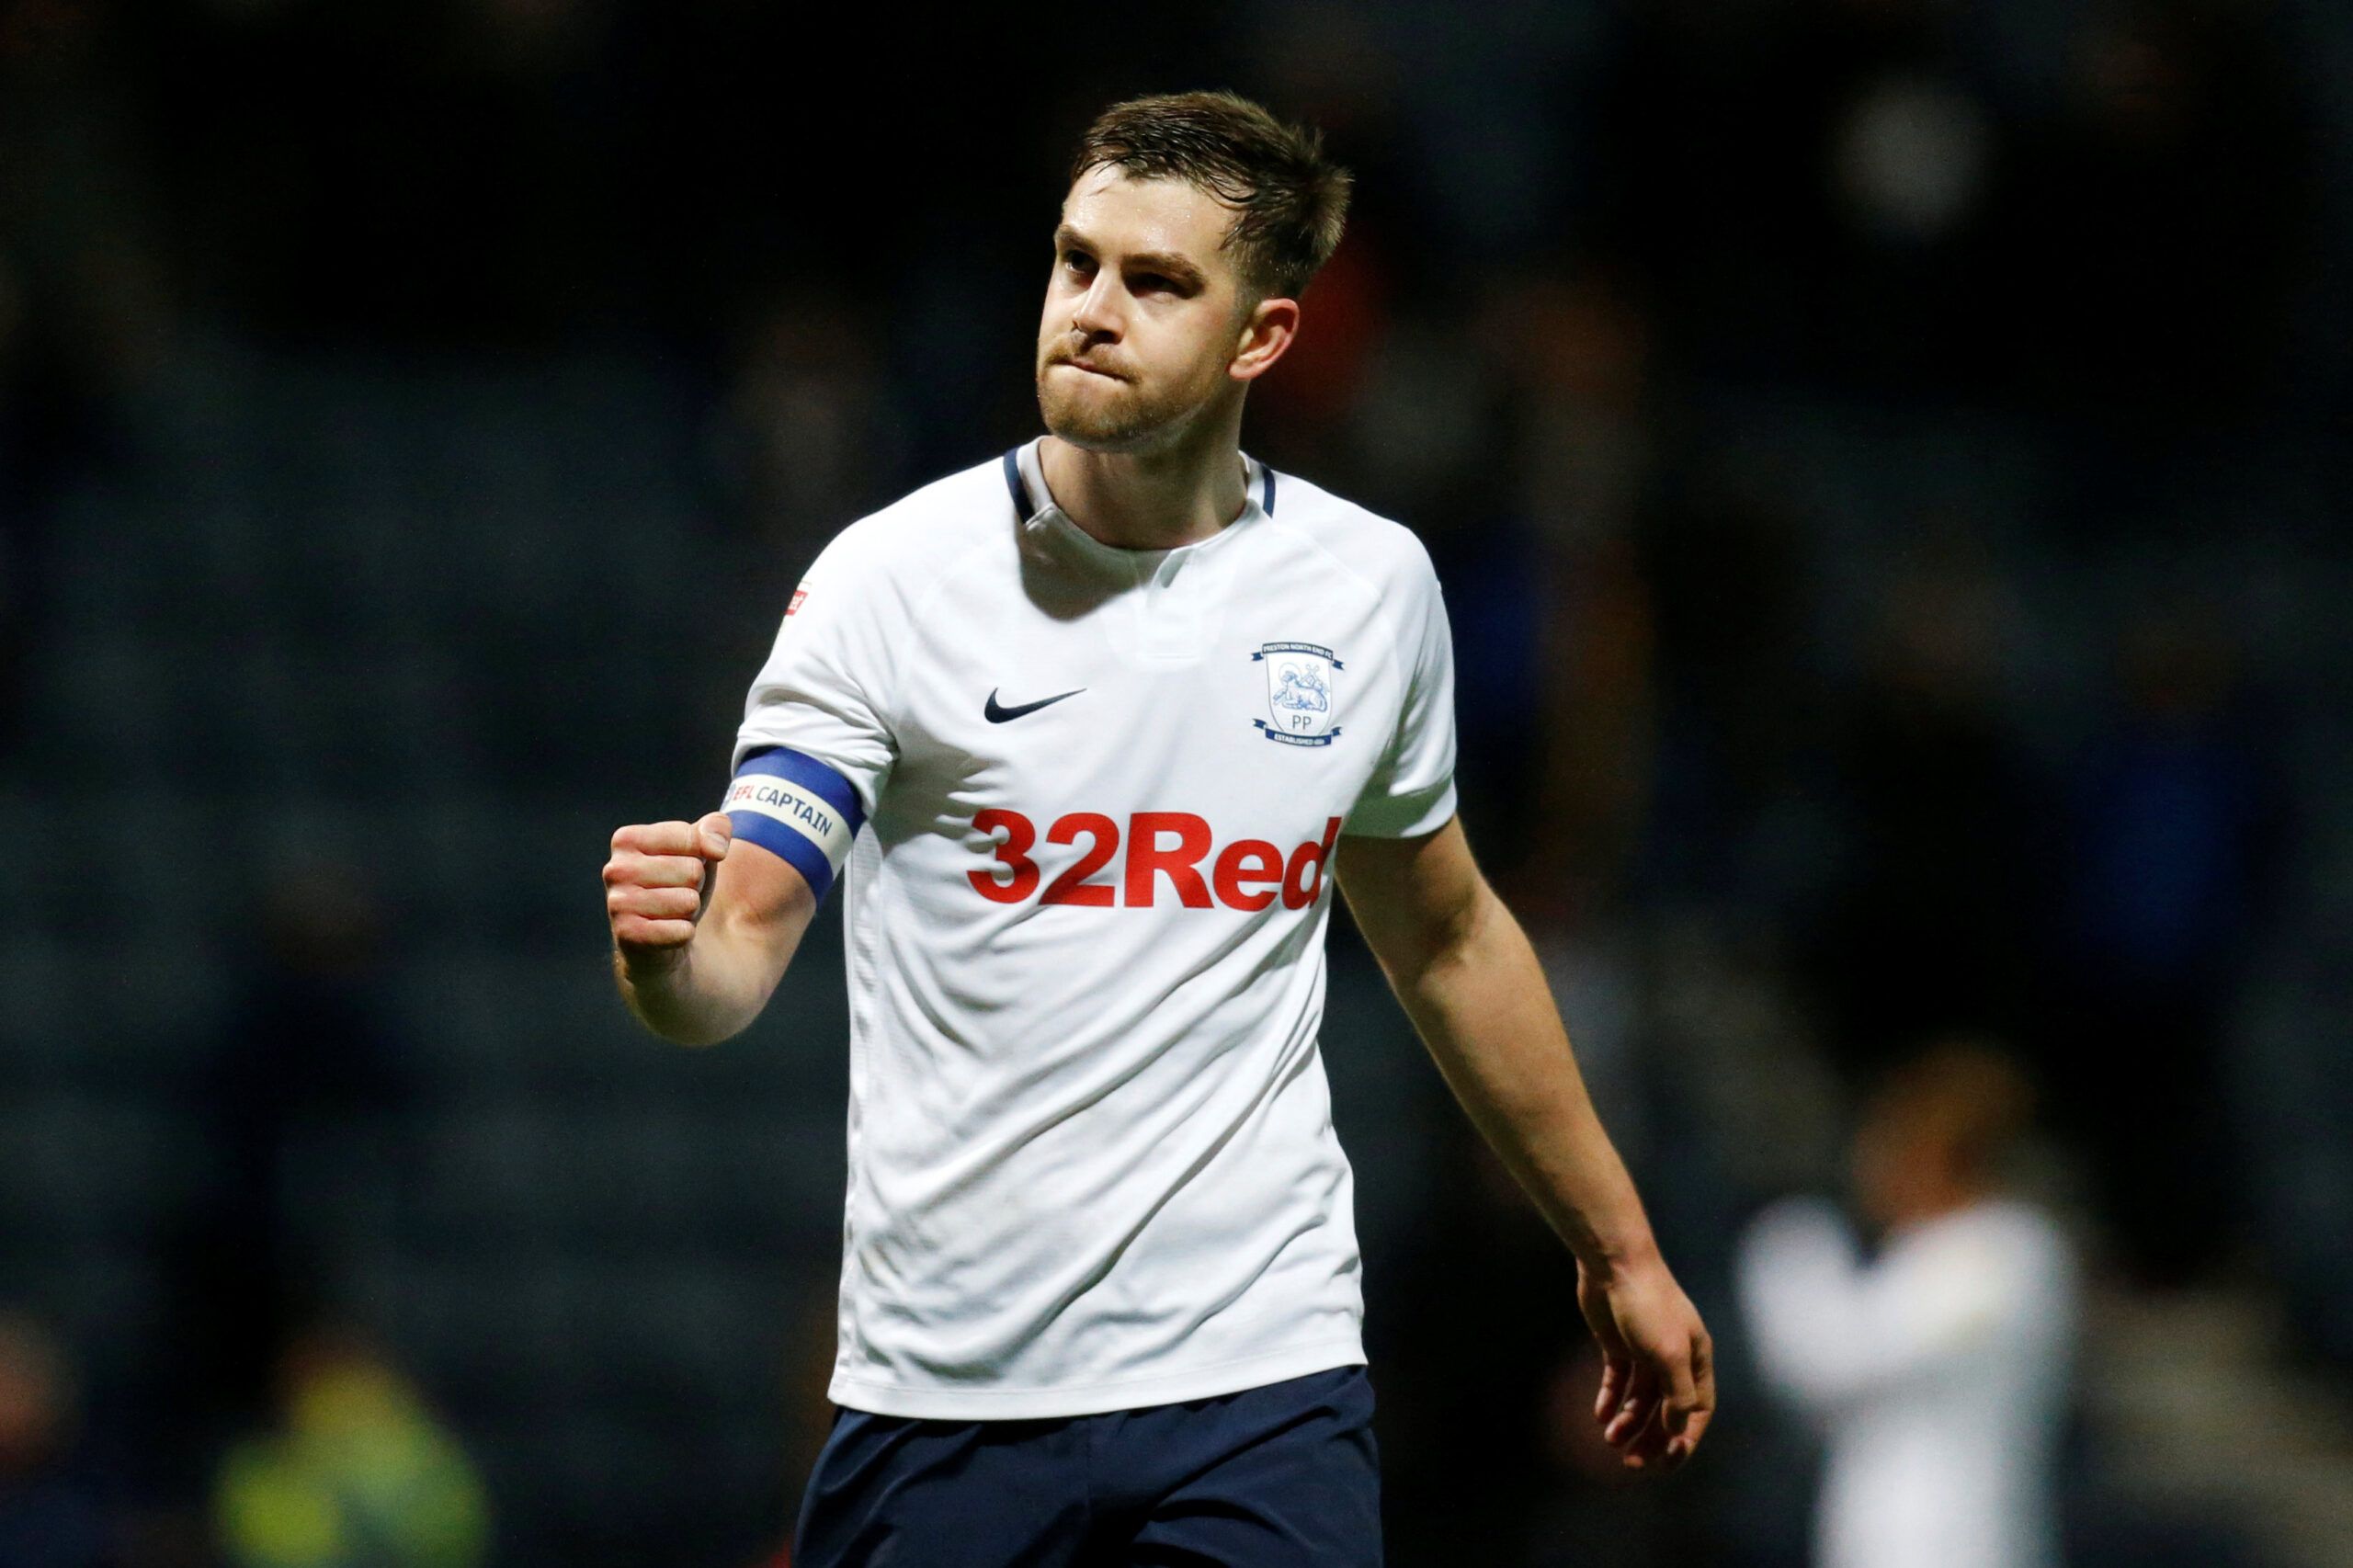 Soccer Football - Championship - Preston North End v Brentford - Deepdale, Preston, Britain - October 24, 2018  Preston North End's Paul Huntington celebrates after the game   Action Images/Ed Sykes  EDITORIAL USE ONLY. No use with unauthorized audio, video, data, fixture lists, club/league logos or 